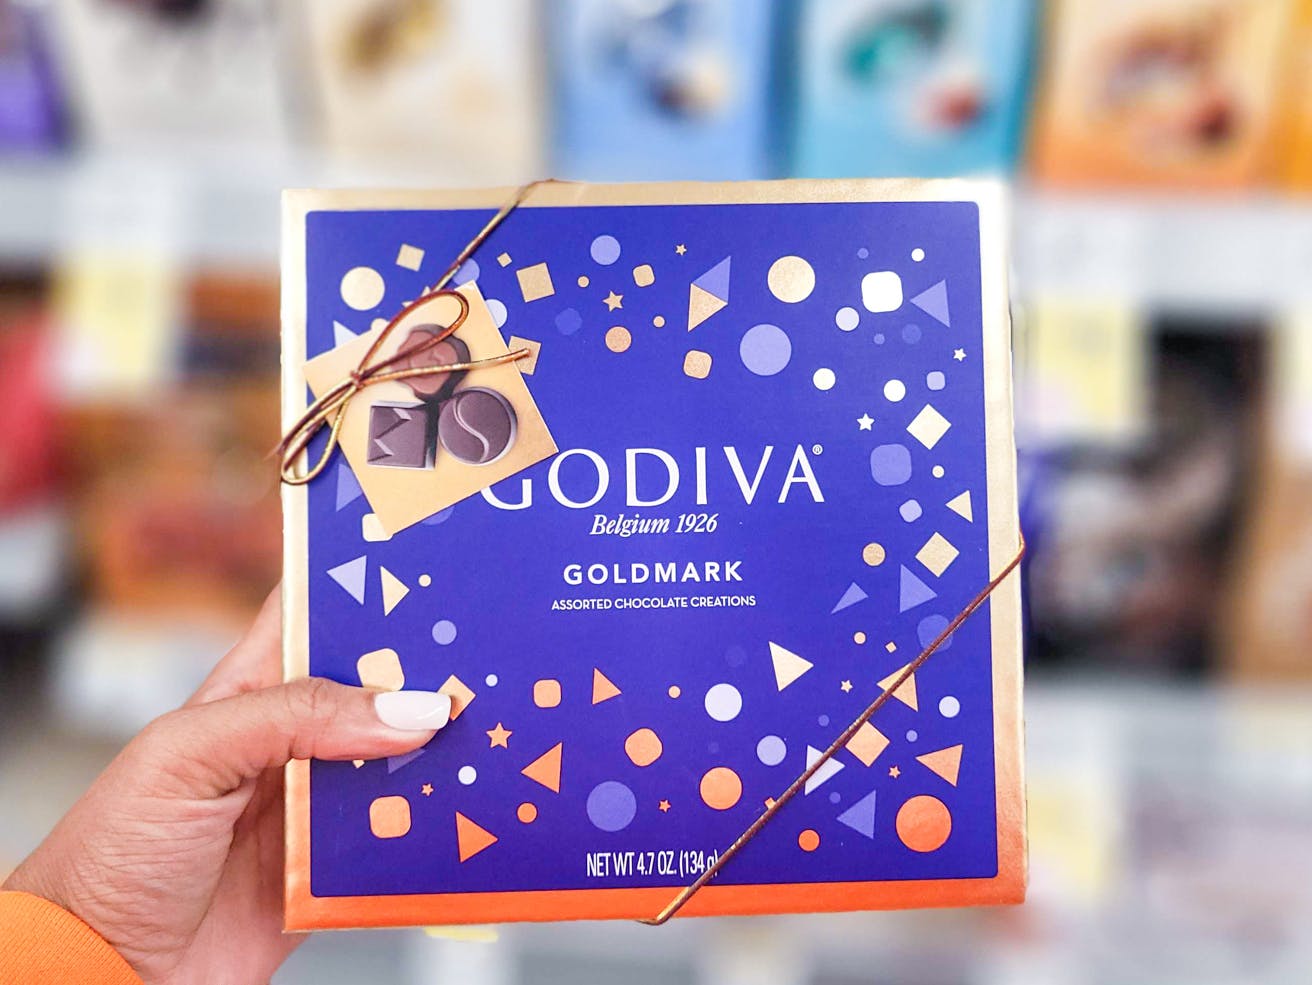 A person's hand holding a box of Godiva assorted chocolates.